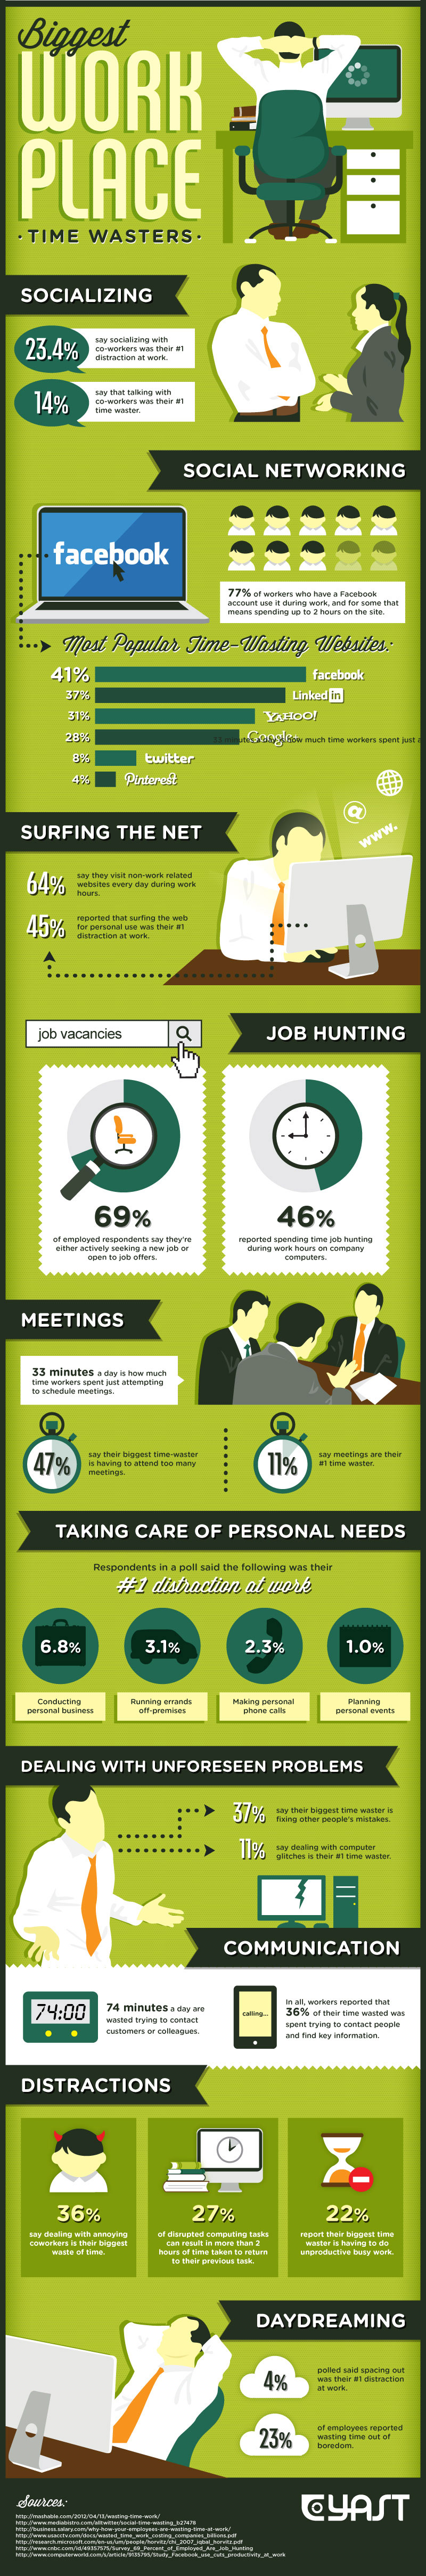 Biggest-Workplace-Time-Wasters-Infographic